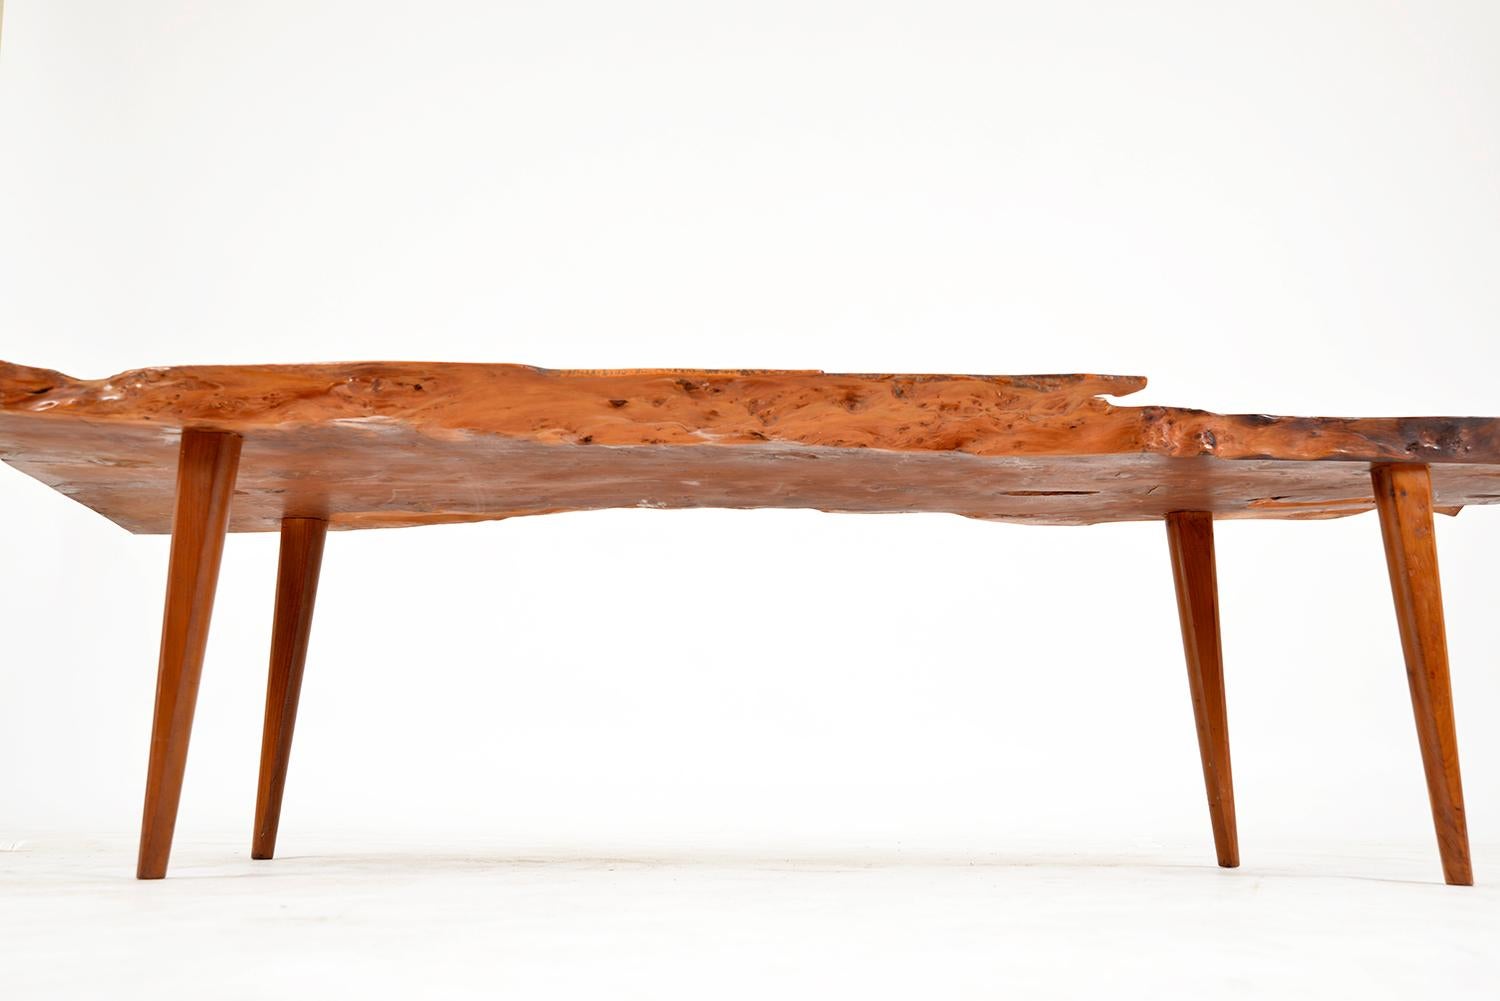 British Yew Wood Live Edge Plank Coffee Table by Reynolds of Ludlow English 1950s 1960s